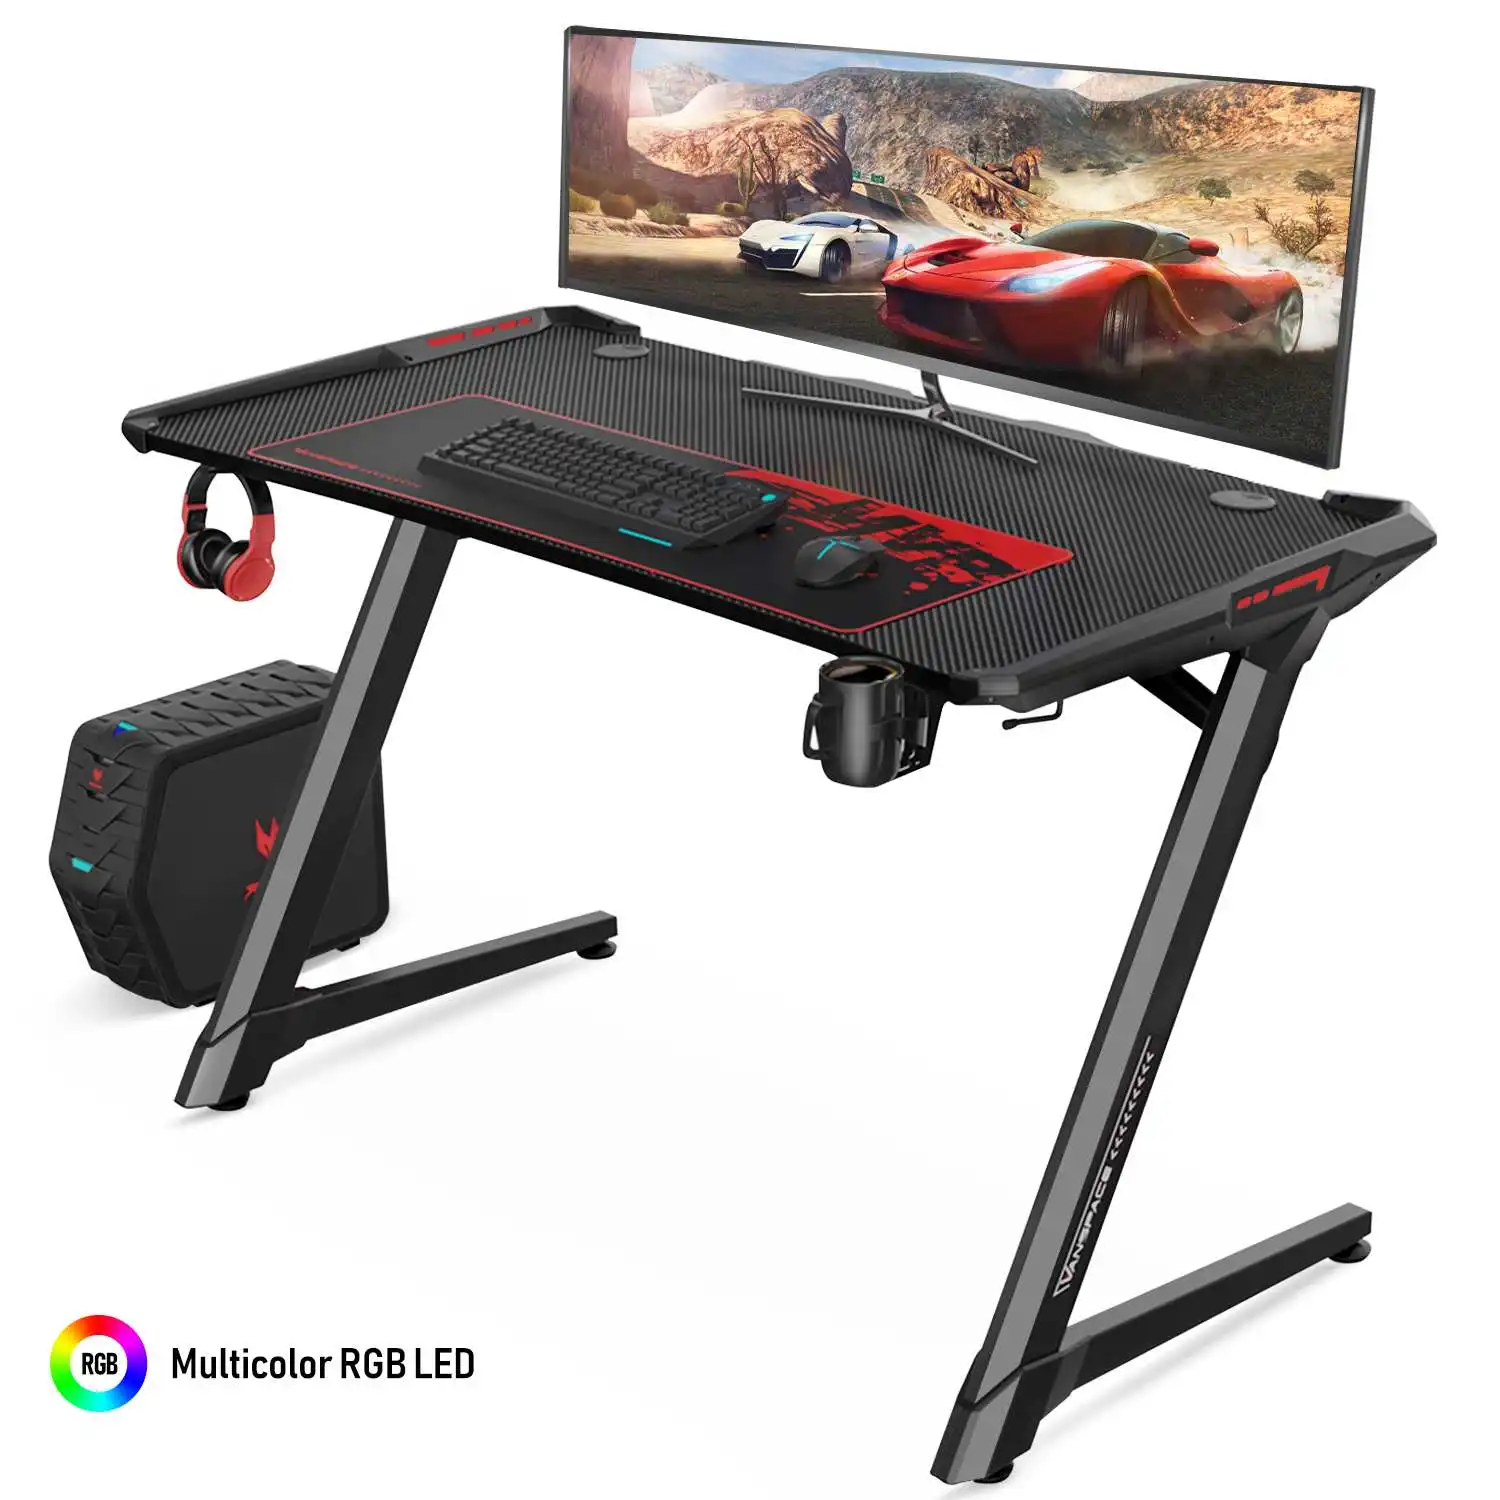 Teak and Black Legs 47 inches All-in-one Gaming Table/Workstation with Display Stand DlandHome Gaming Computer Desk with RGB LED Mouse Pad 1 Pack ND14 Pro